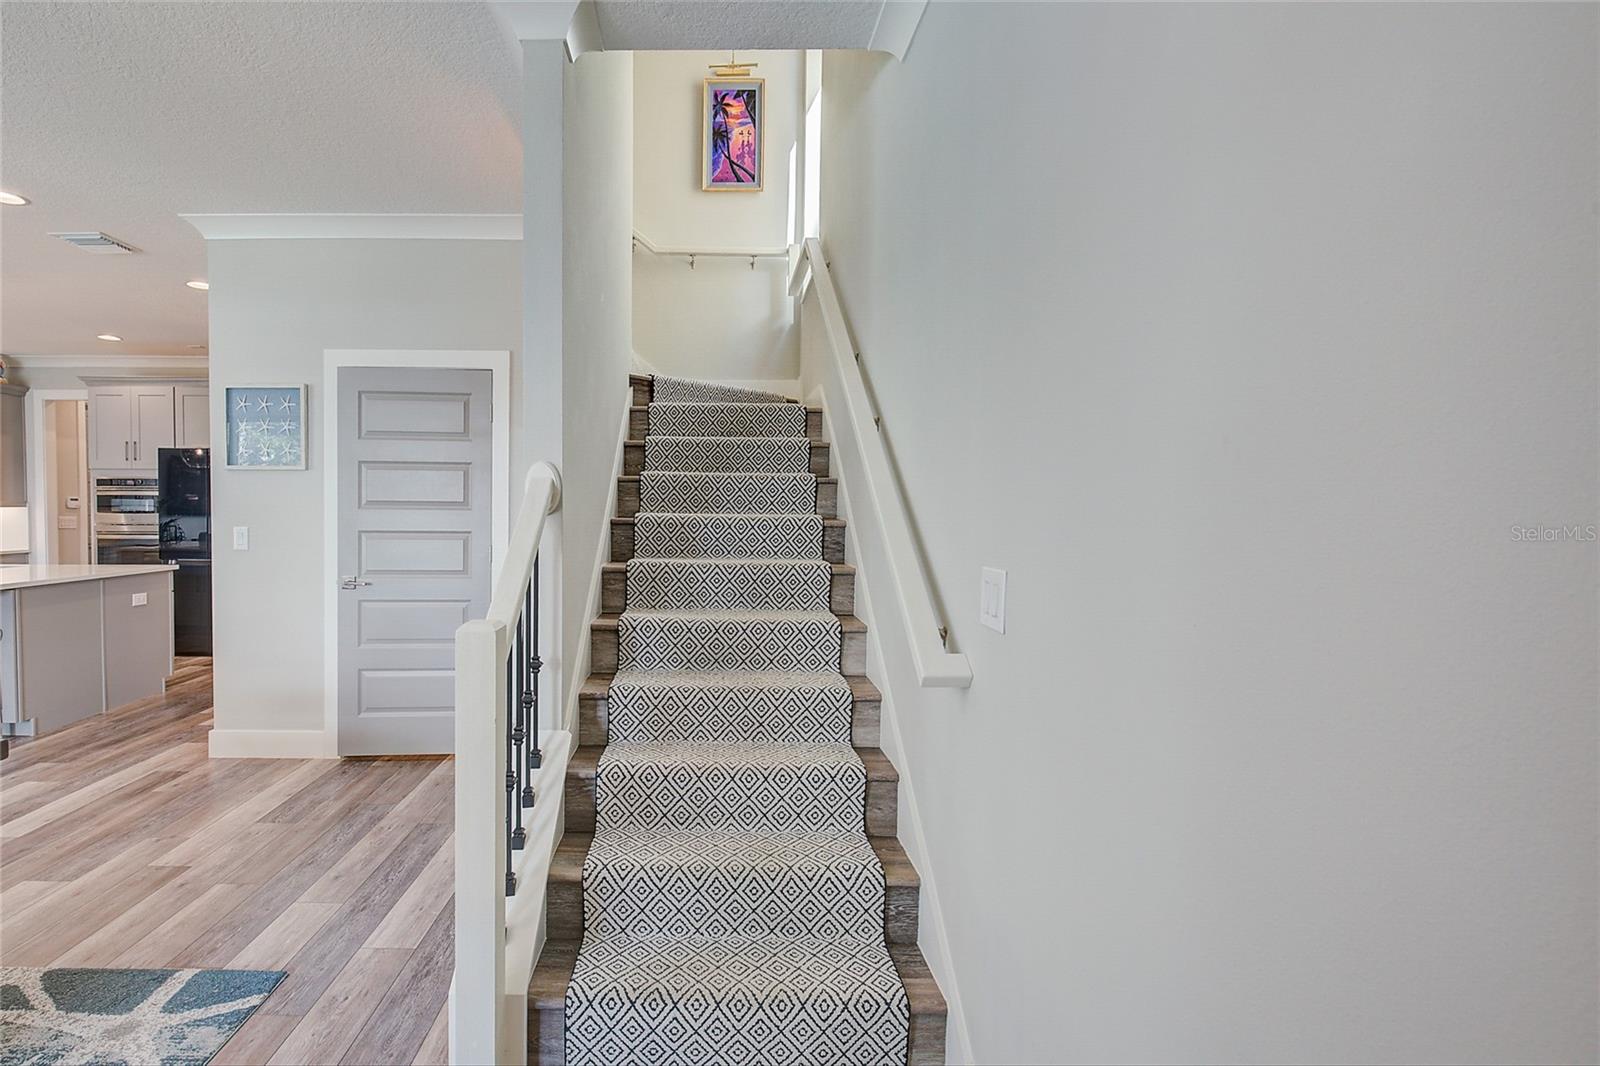 STAIRS TO 2ND FLOOR